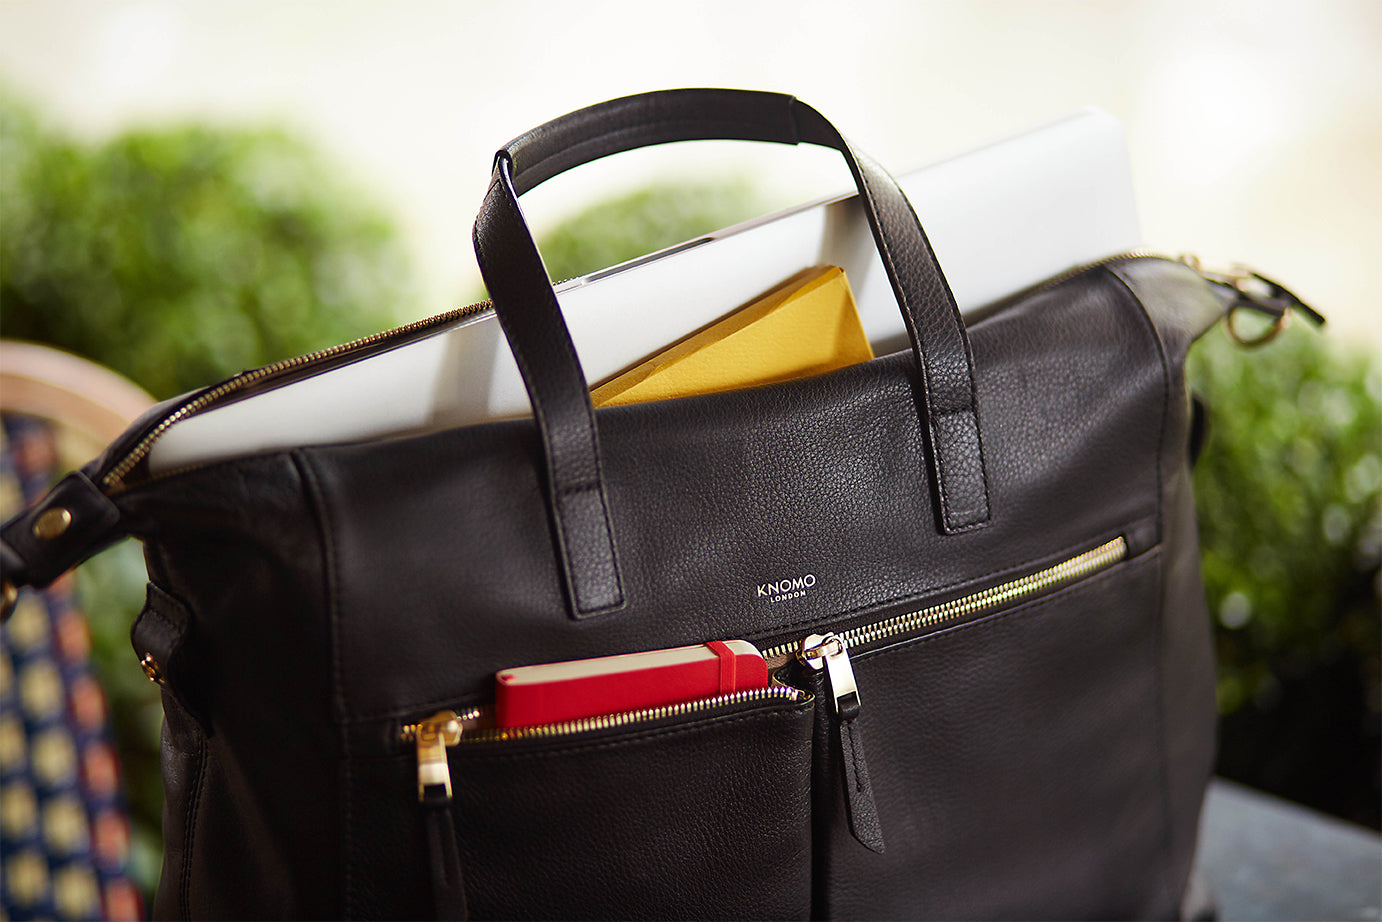 How To Clean Your KNOMO Bag | Blog